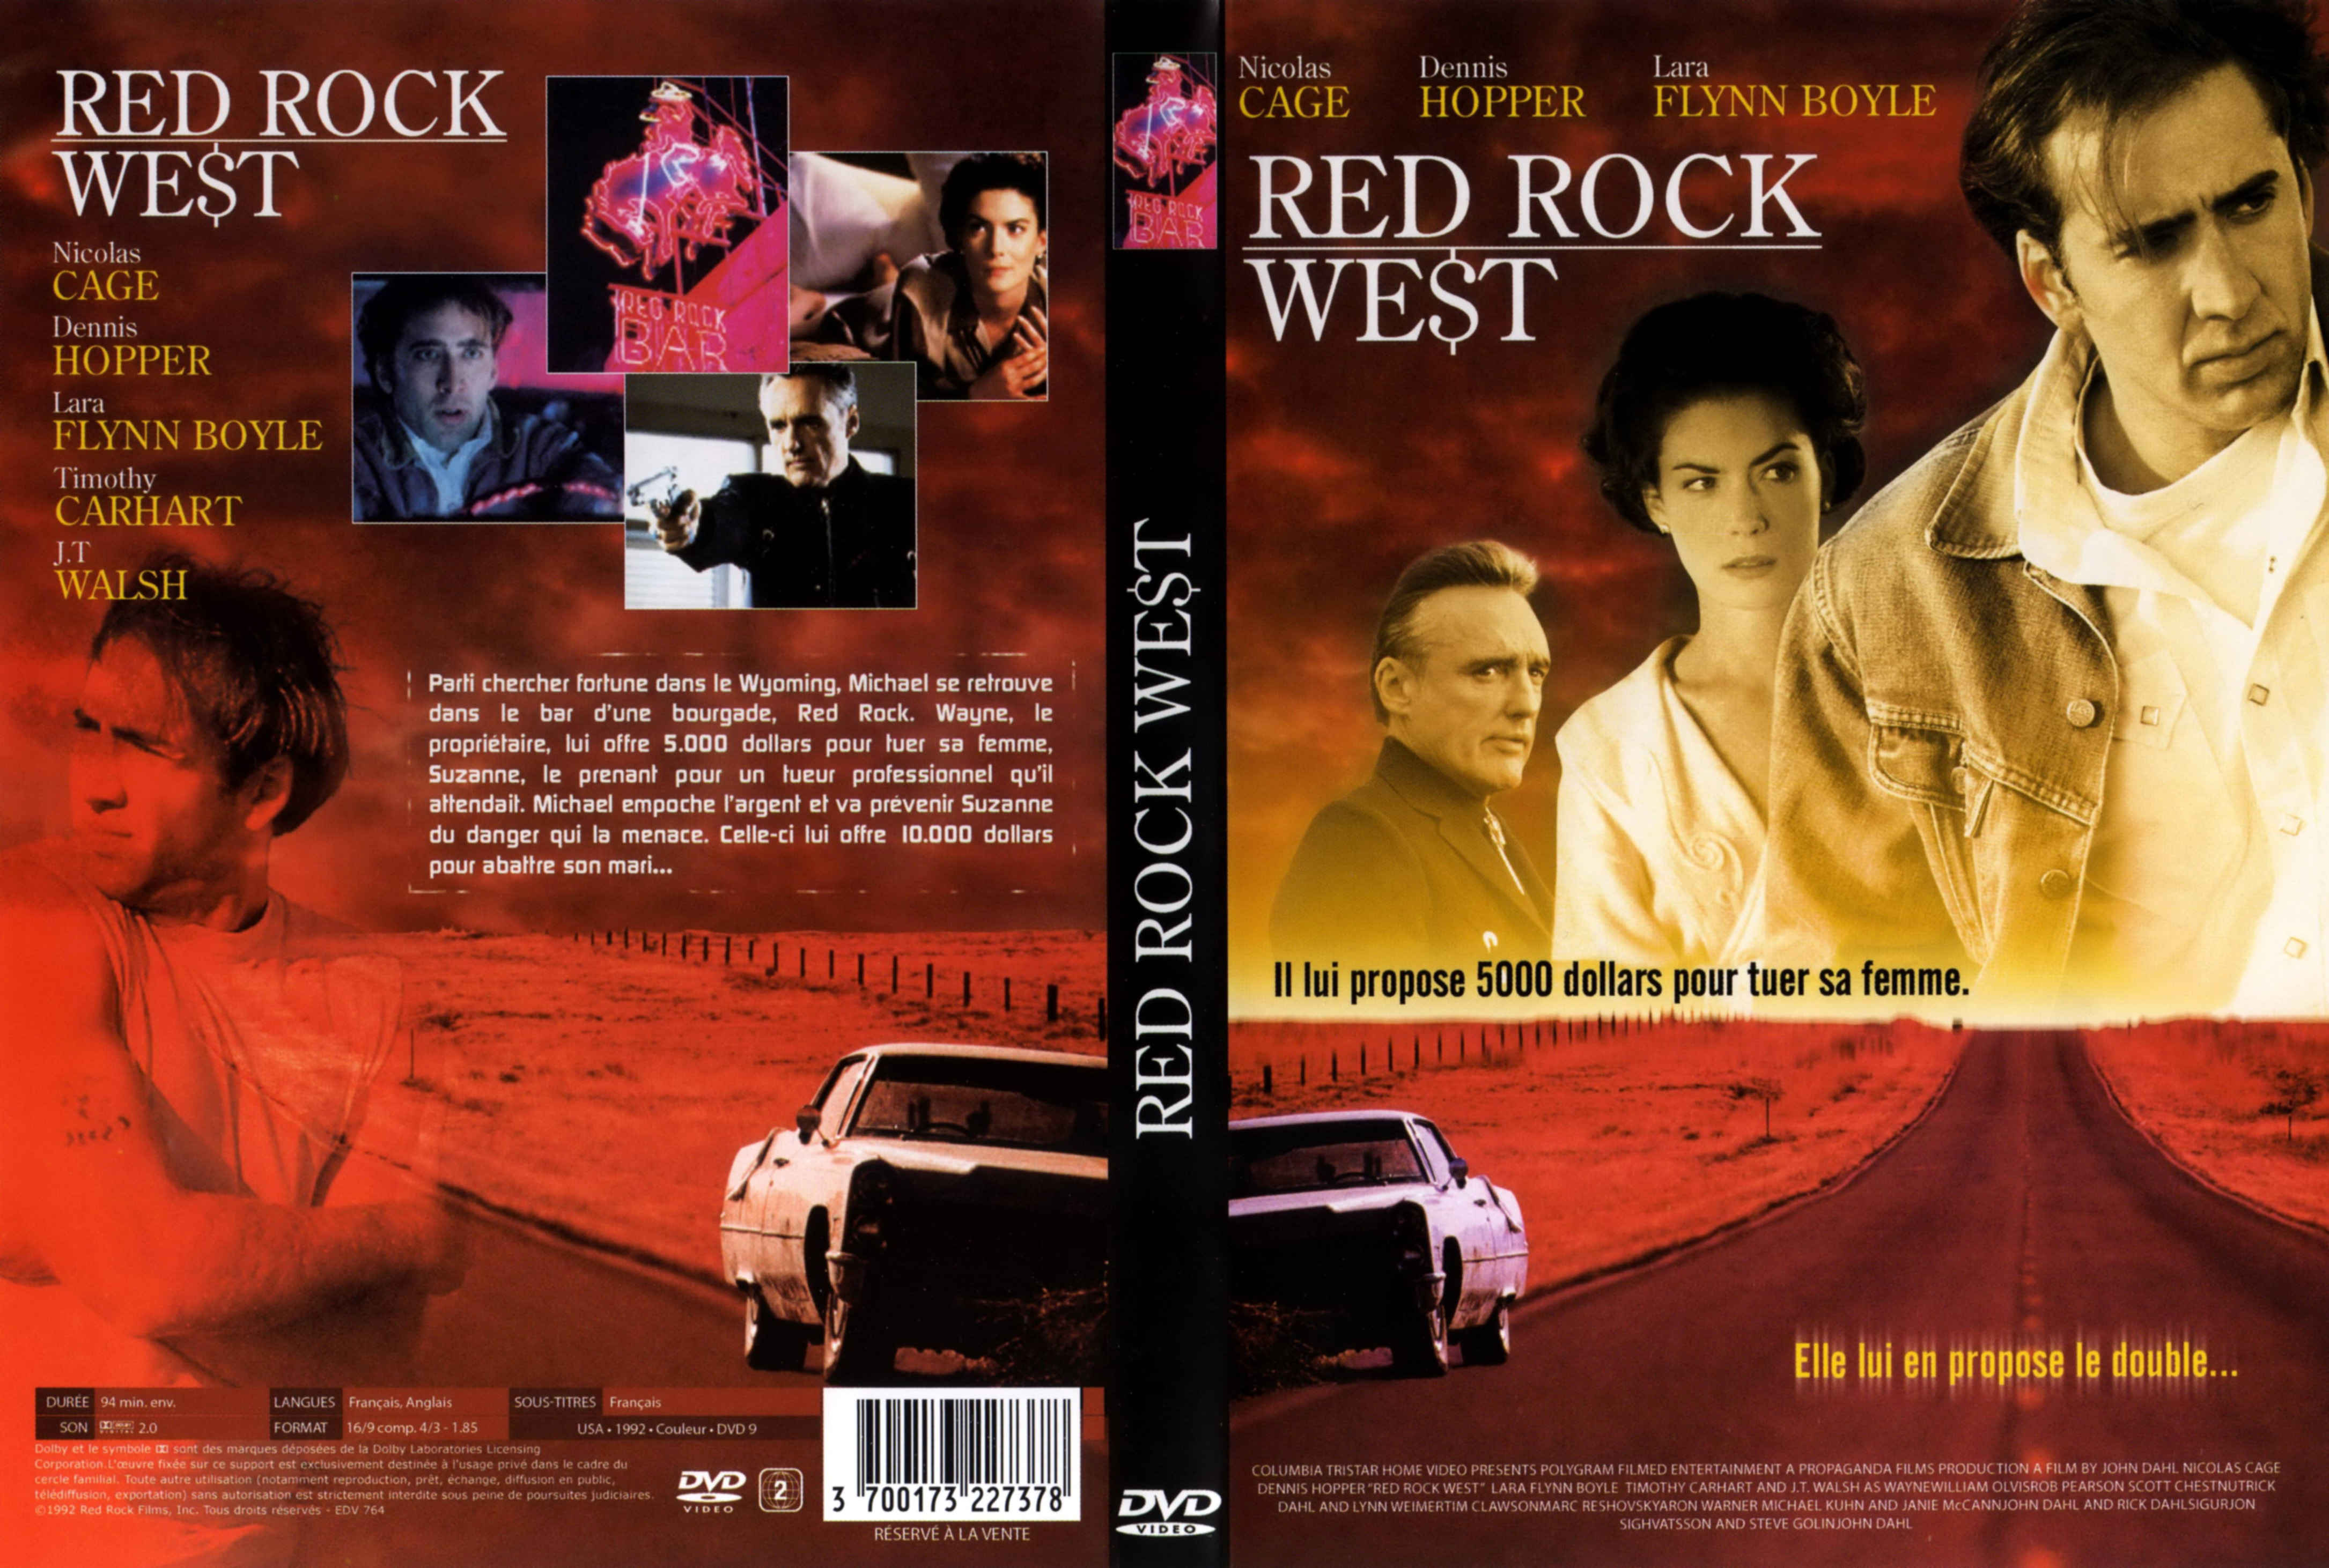 Jaquette DVD Red rock west